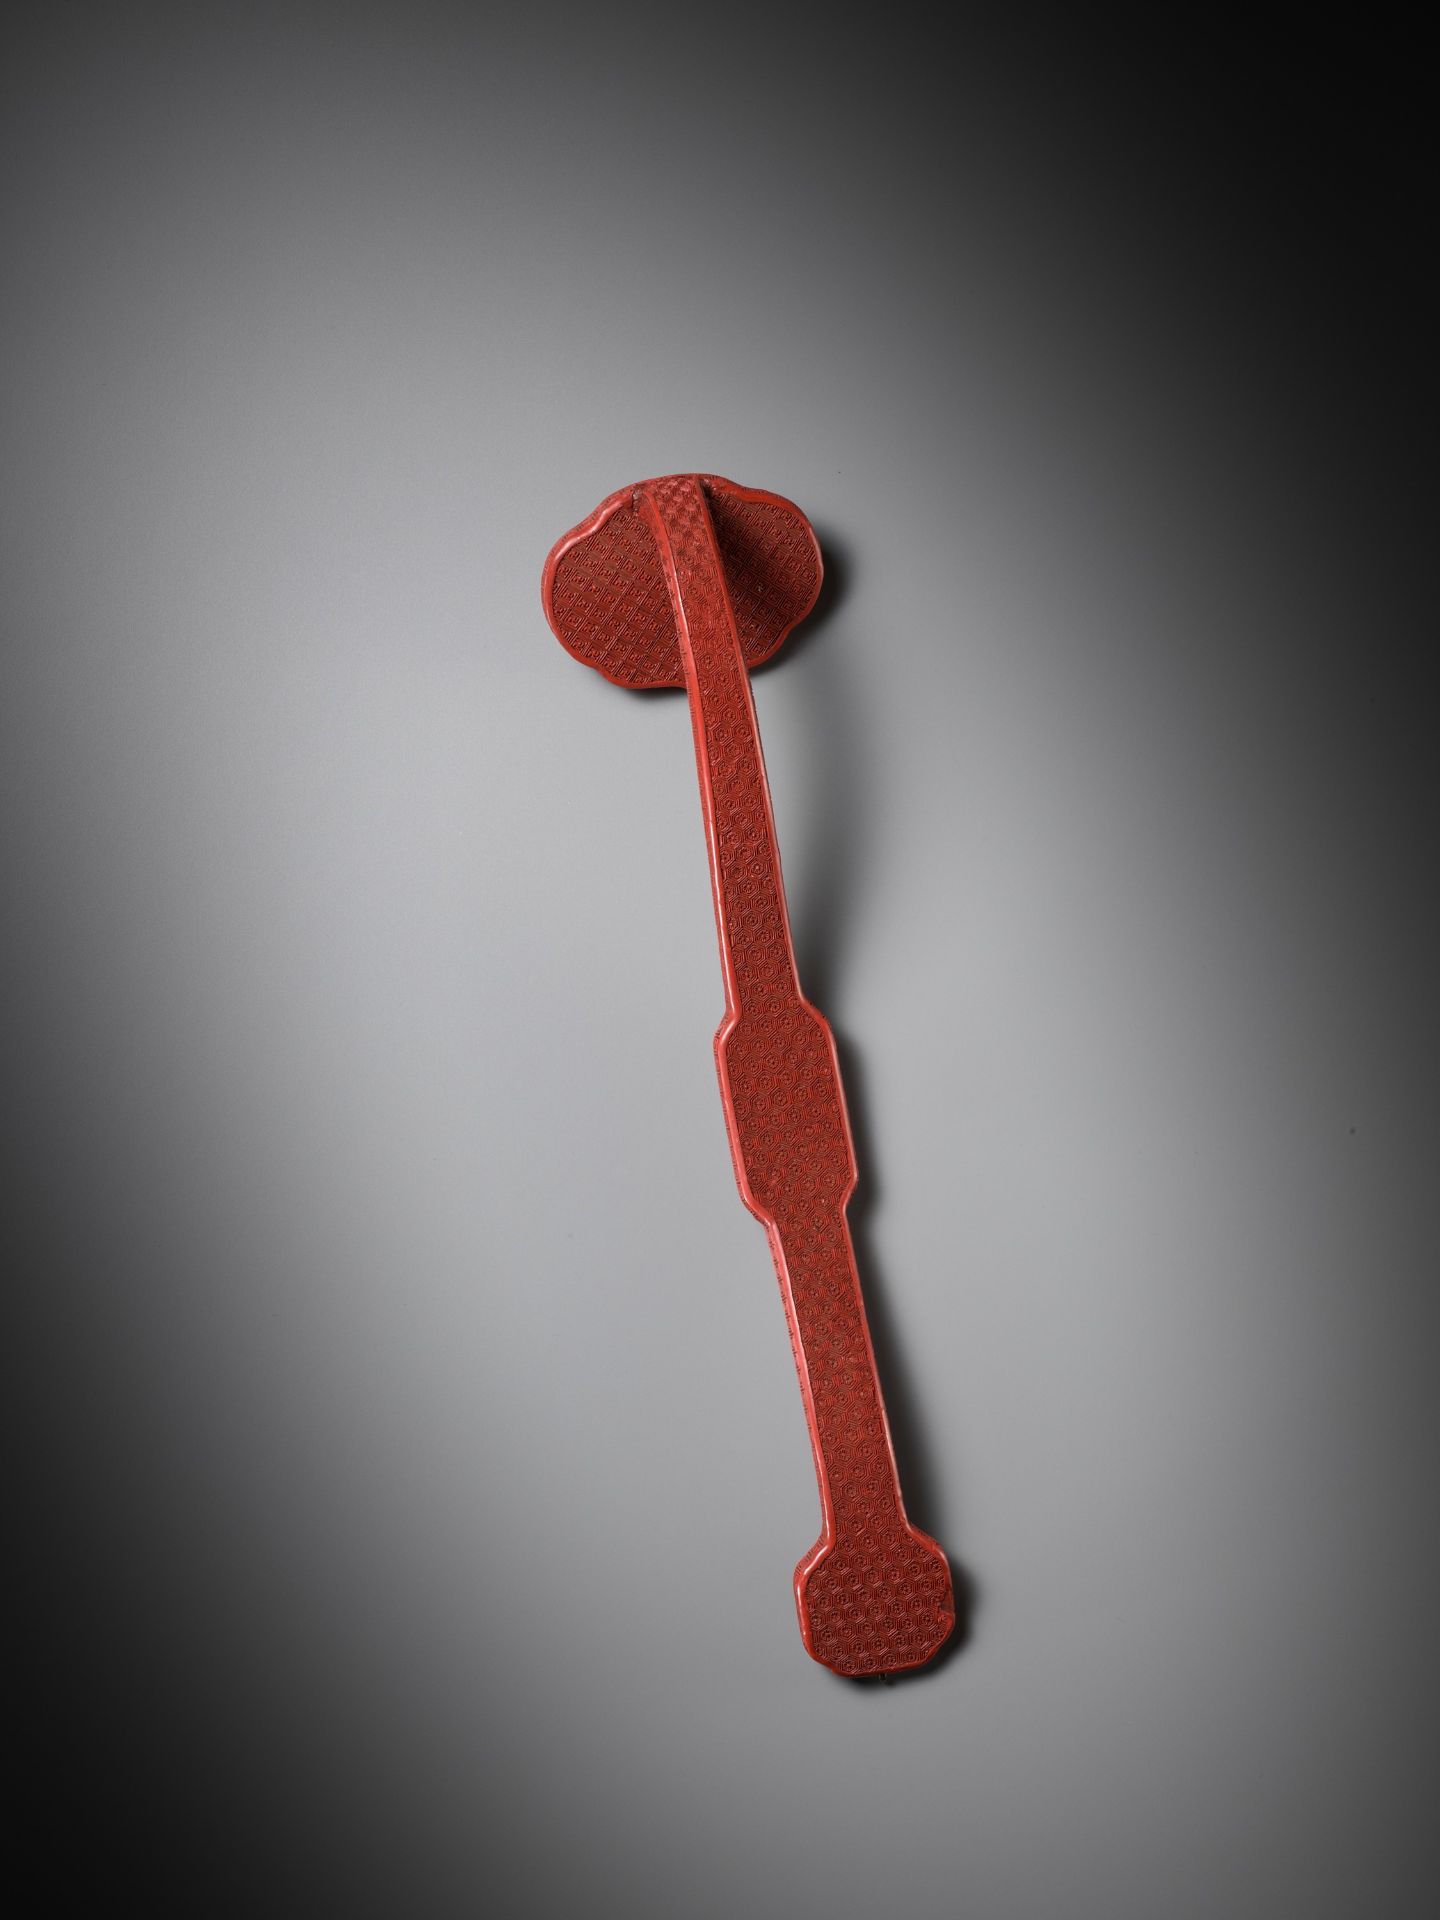 A CARVED CINNABAR LACQUER 'BAJIXIANG' RUYI SCEPTER, QING DYNASTY - Image 9 of 10